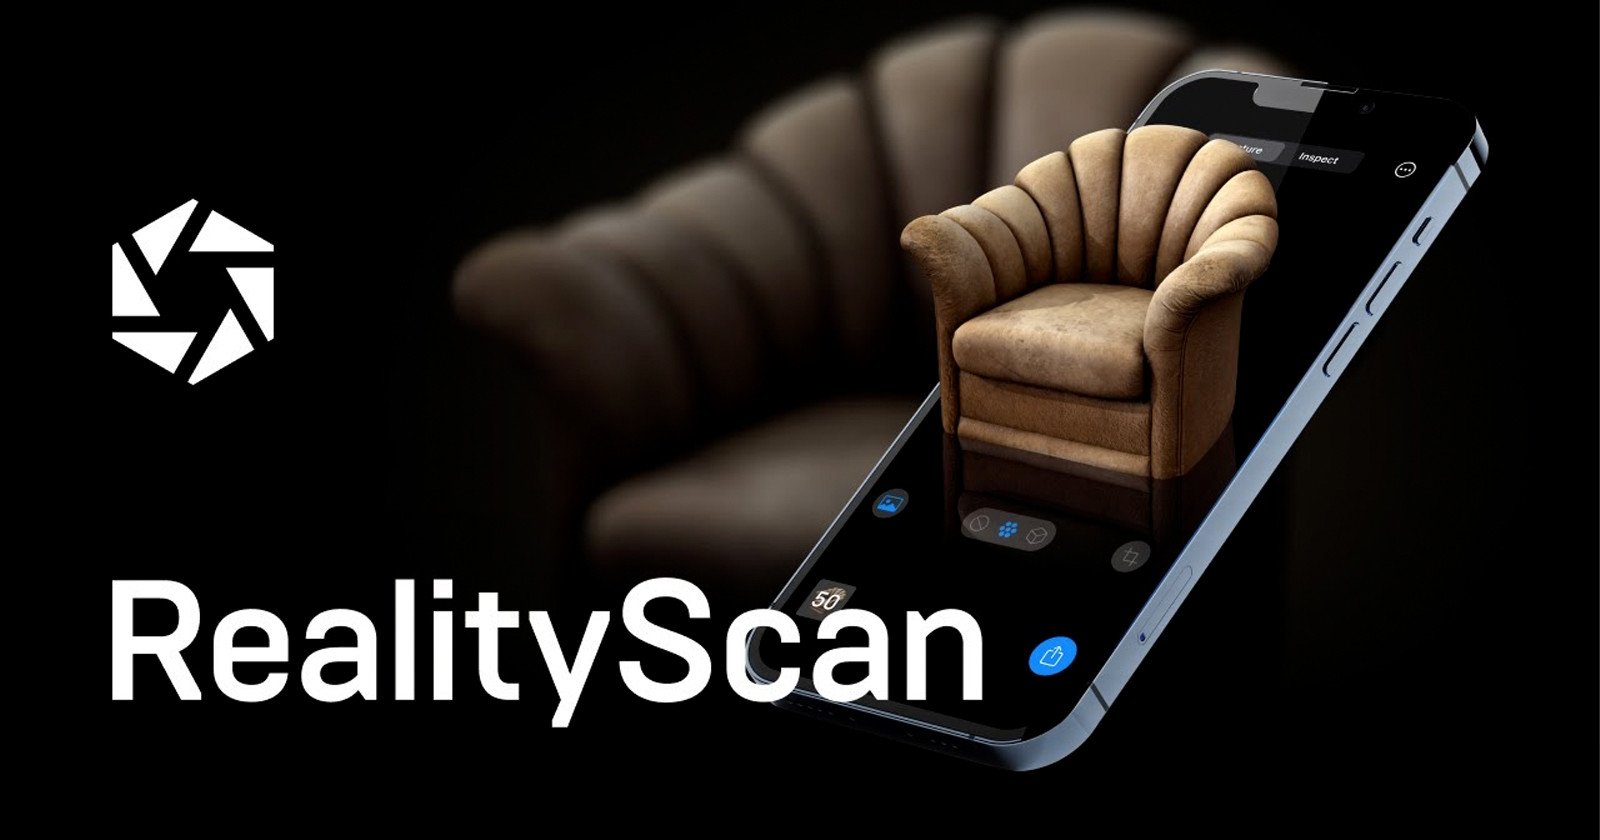  realityscan app can quickly turn iphone photos 